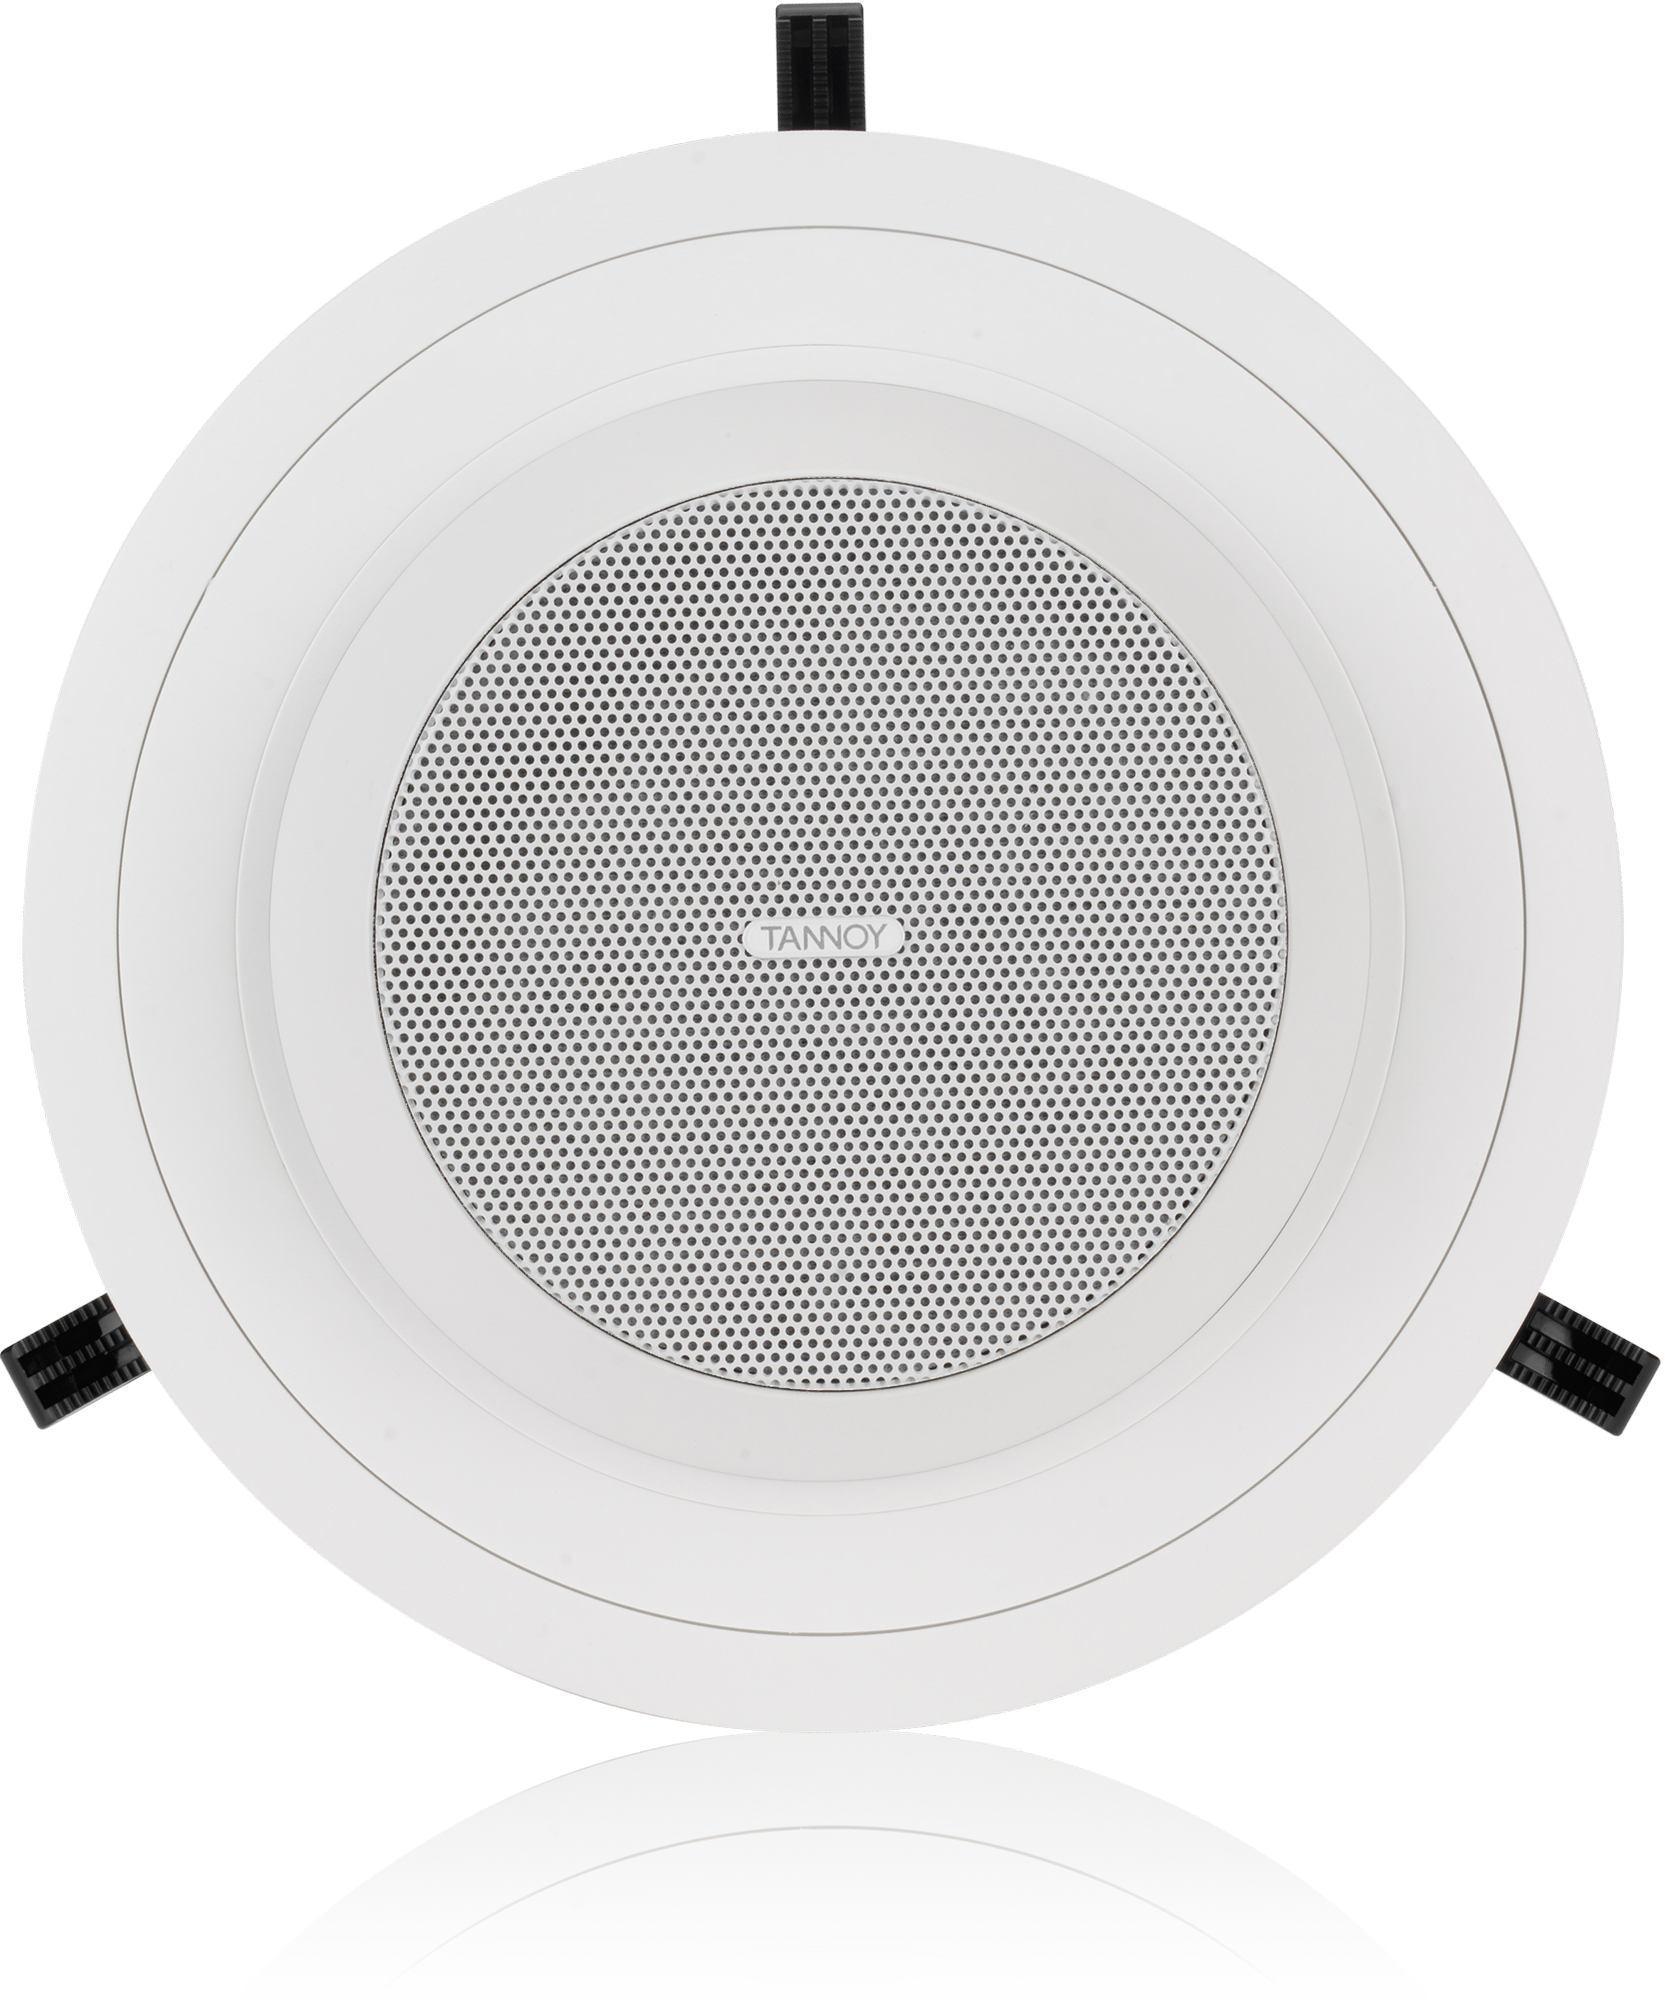 Tannoy 4" Full Range Directional Ceiling Loudspeaker with Dual Concentric Driver for Installation Applications (Blind Mount)